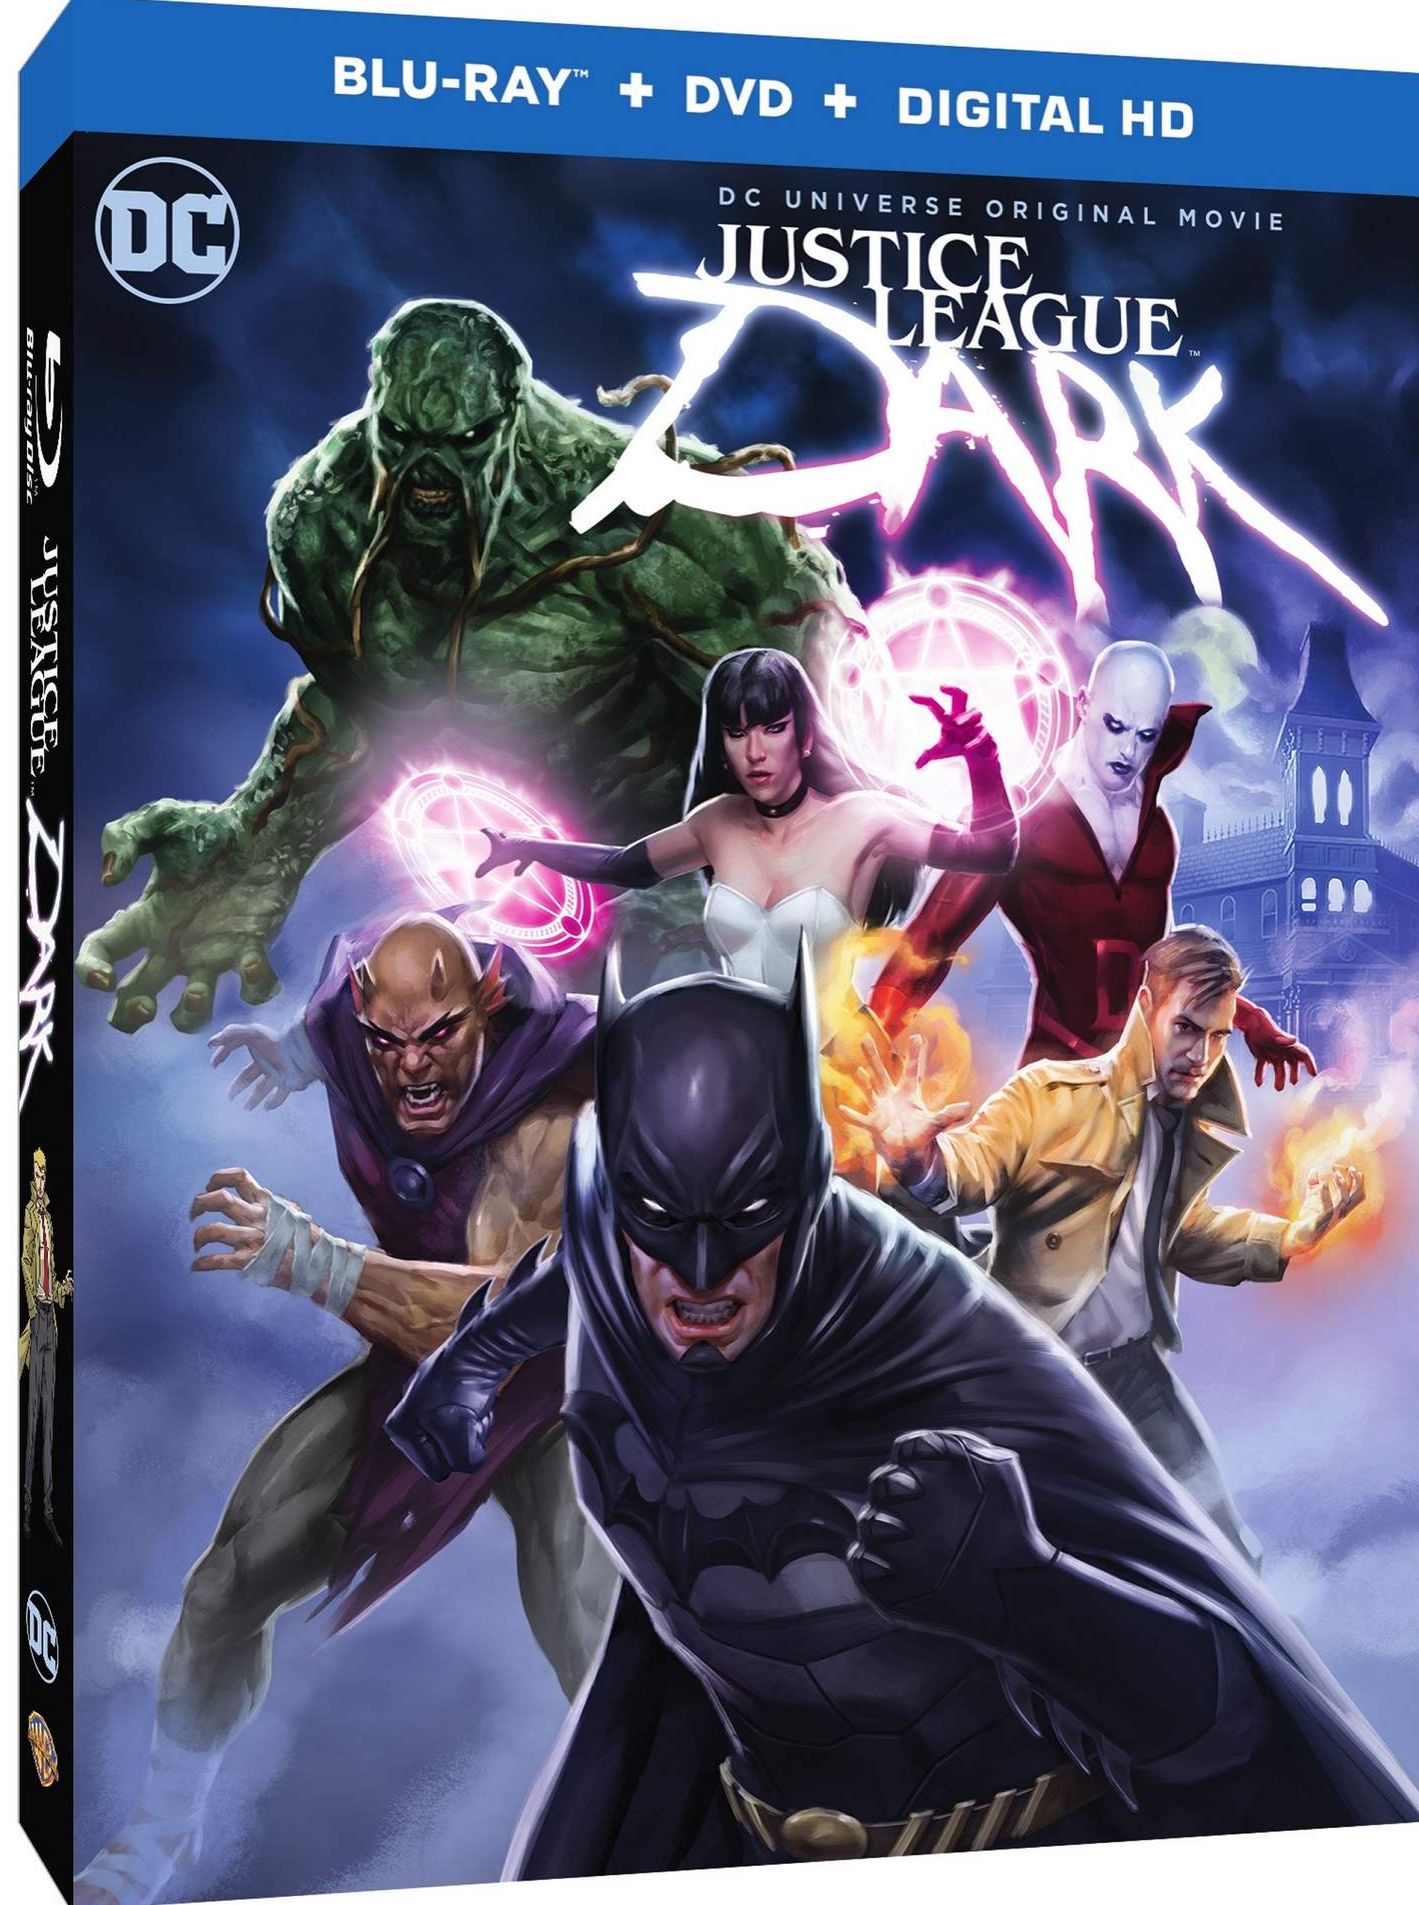 Stunning box art revealed for 'Justice League Dark'